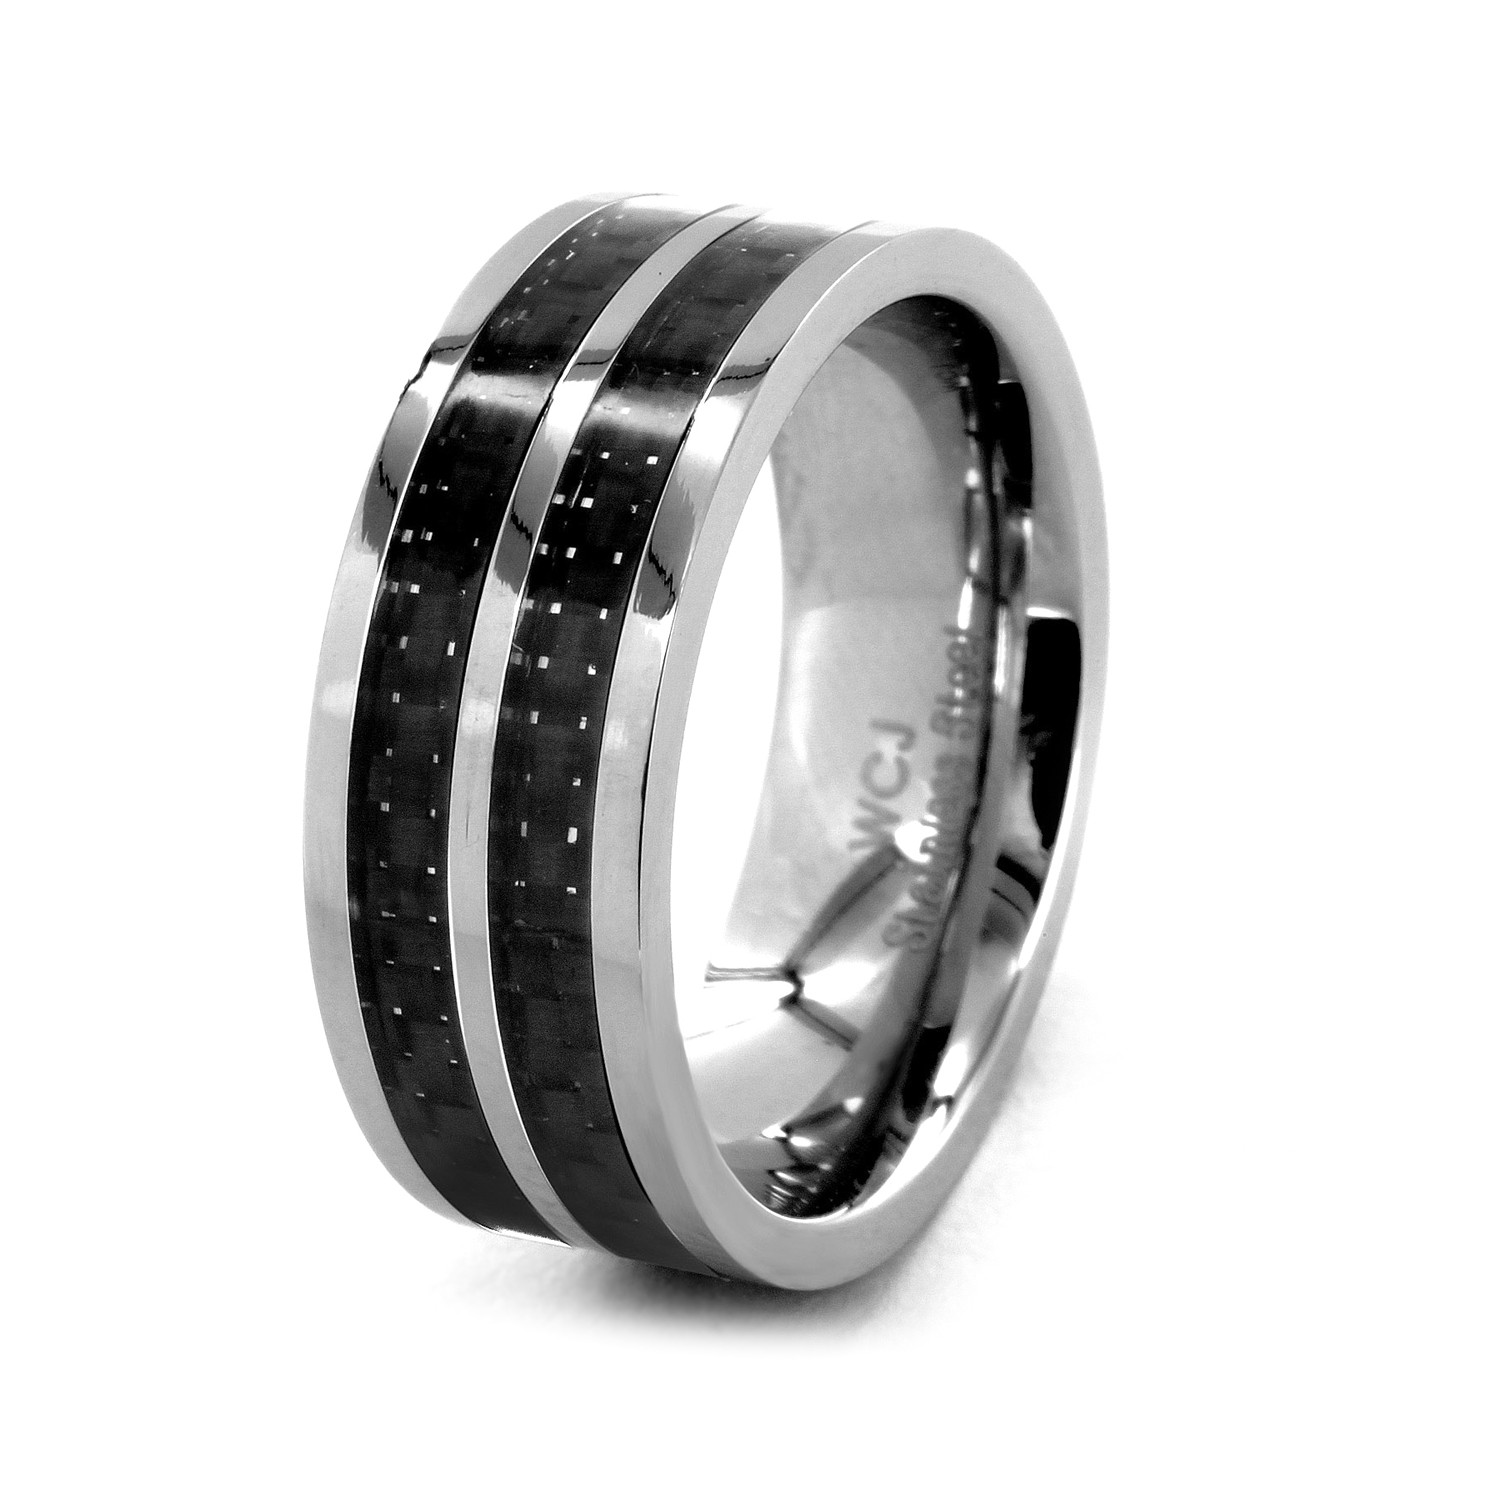 Crucible Stainless Steel Black Striped Carbon Fiber Inlay Ring (Size 8